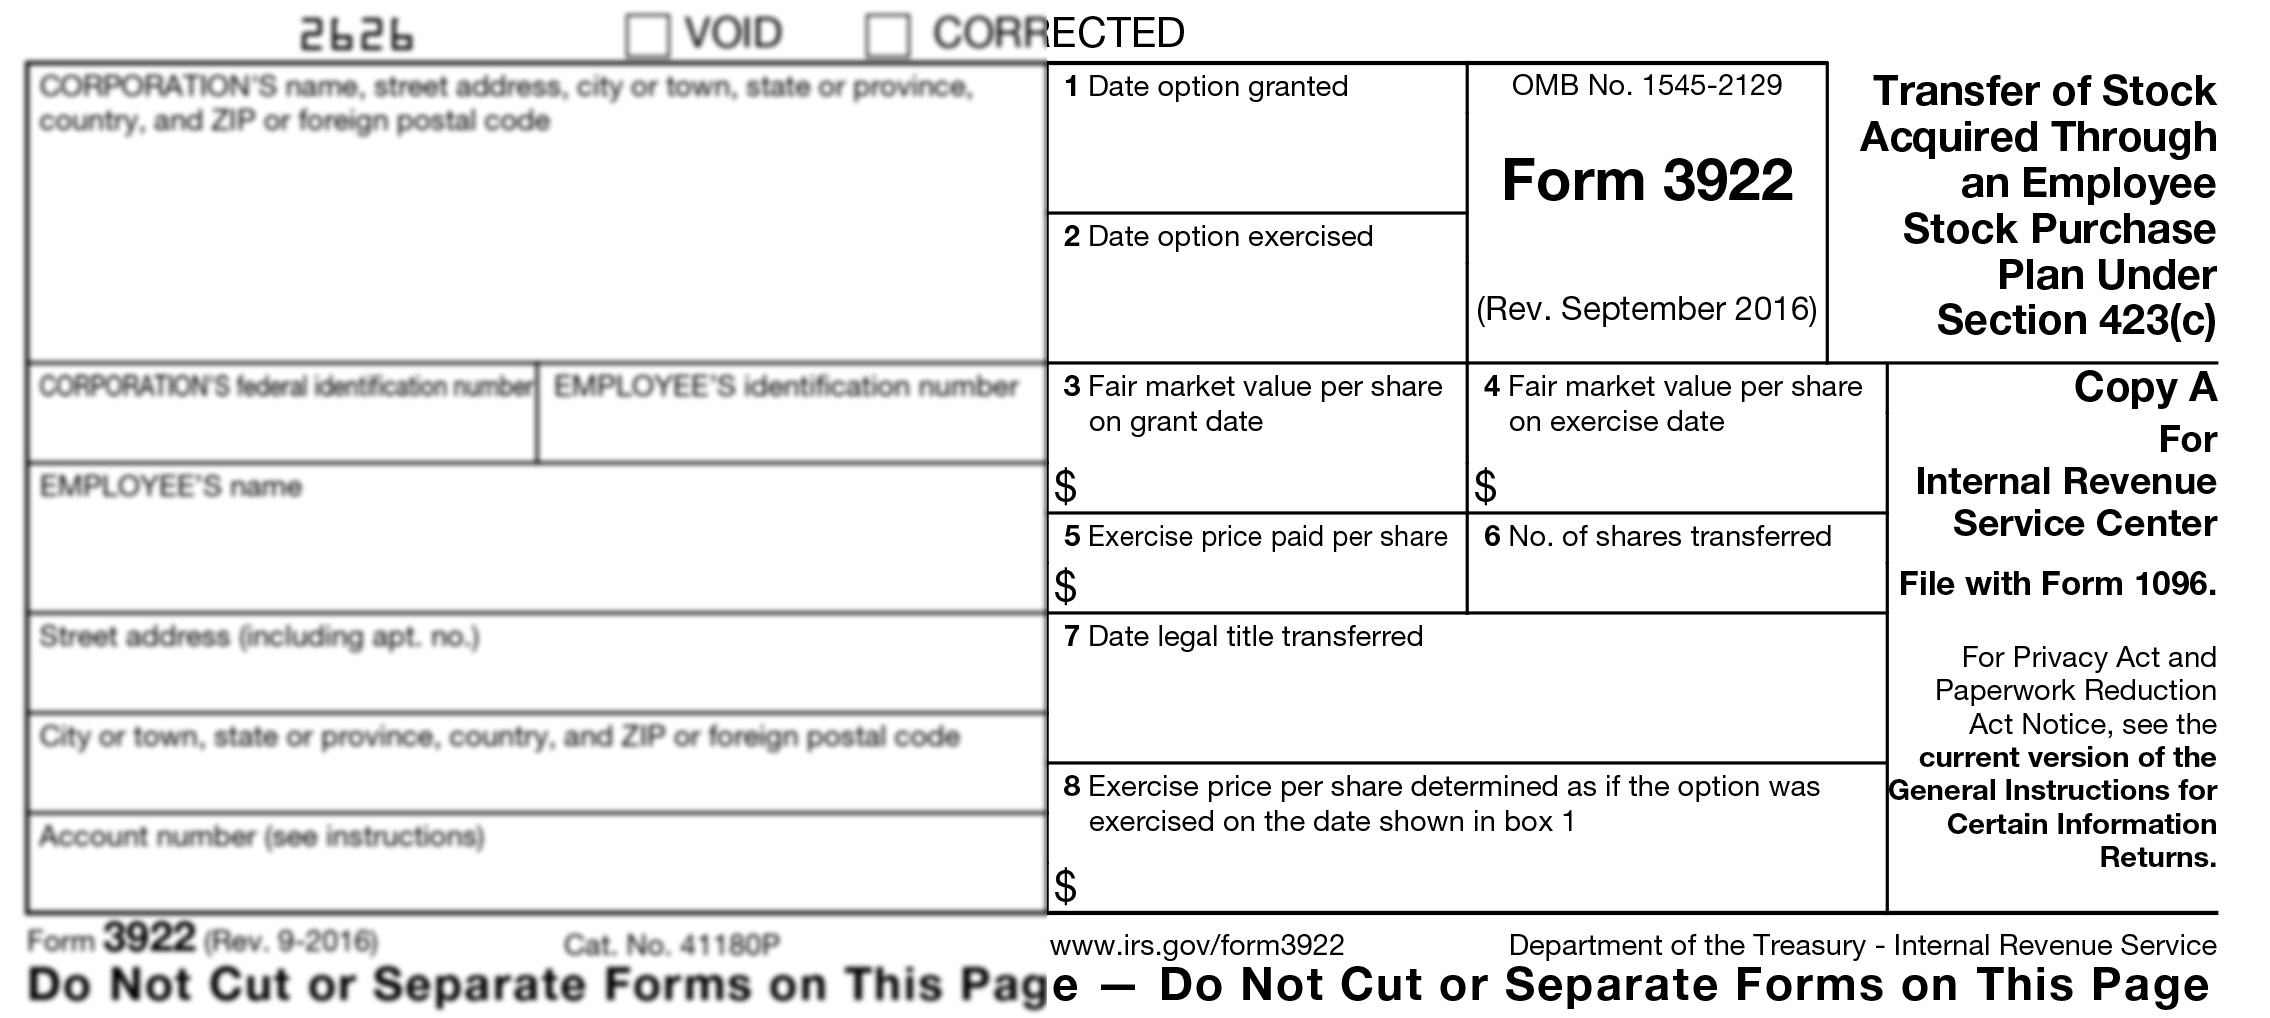 Form 3922 Instructions